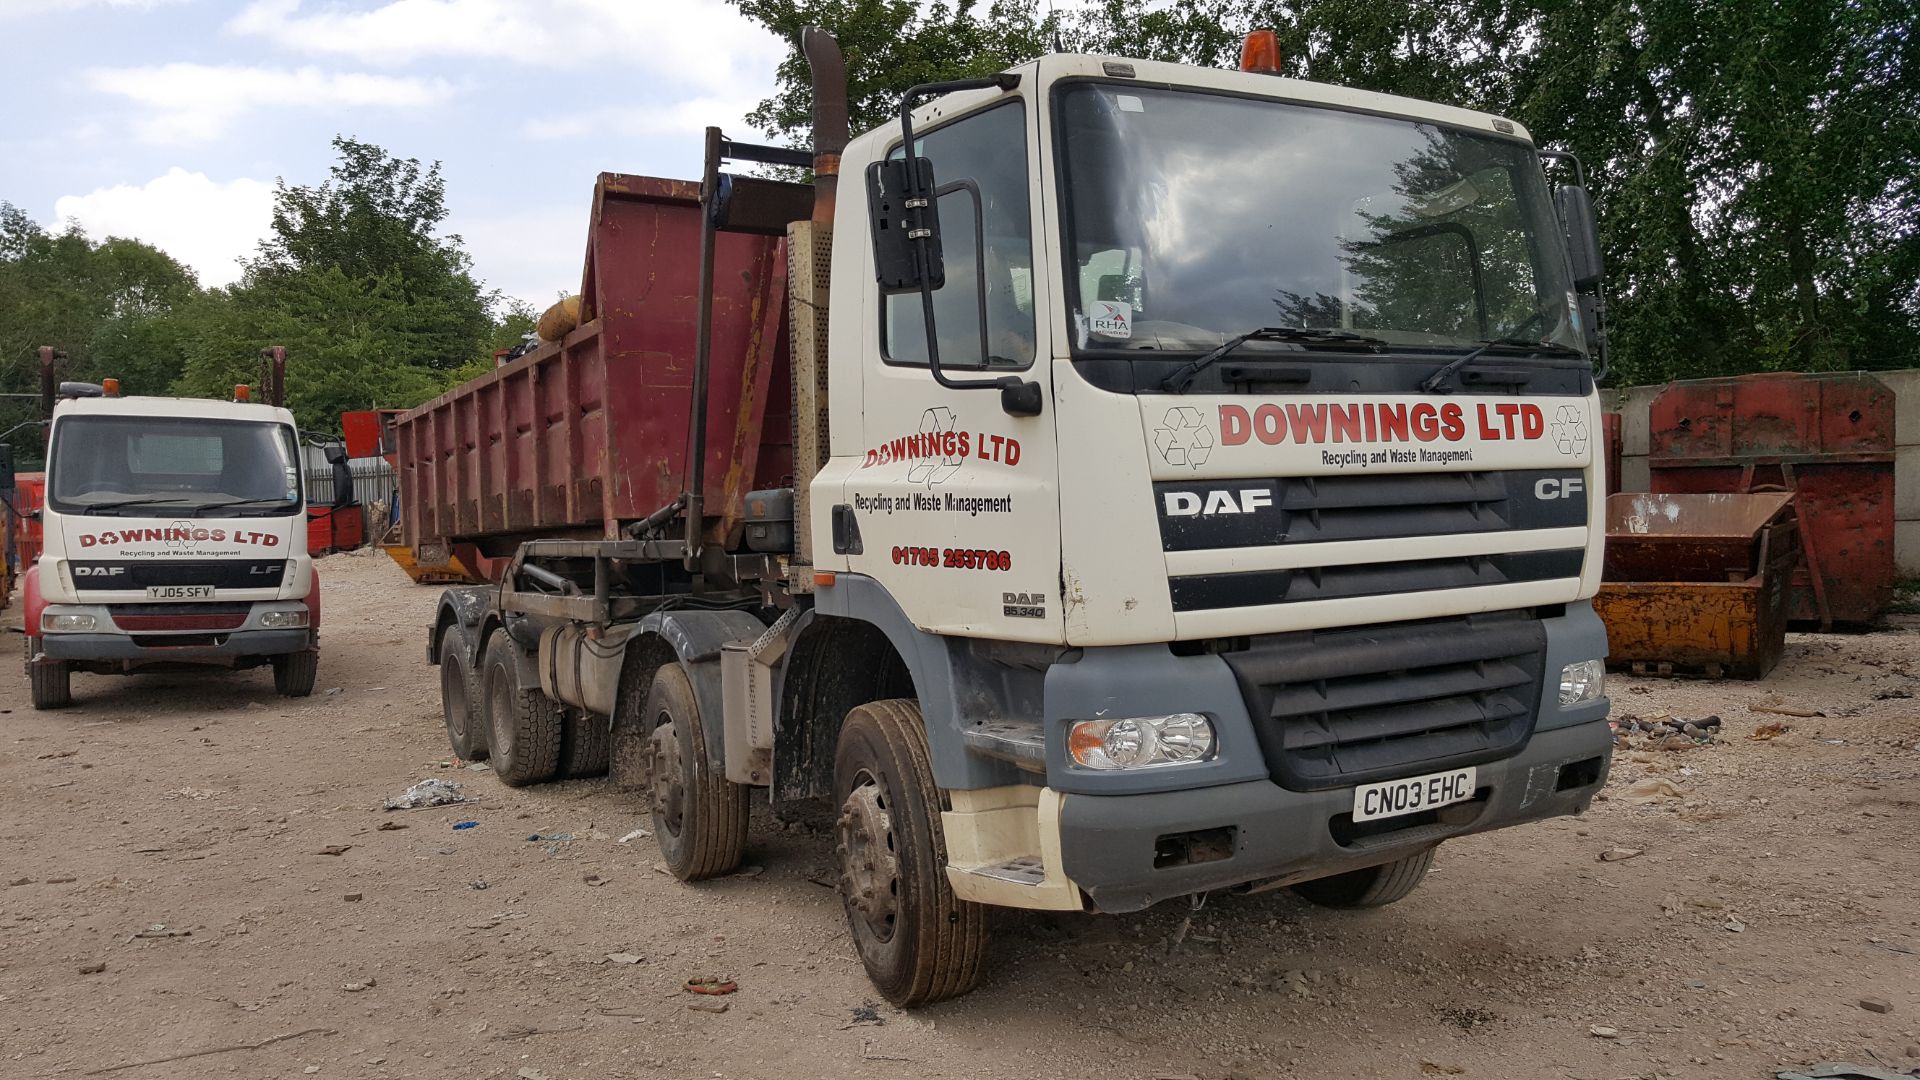 DAF FAD CF 85.340 32 tonne 4 axle rigid chassis roll on roll off skip lorry Recorded approx. KM